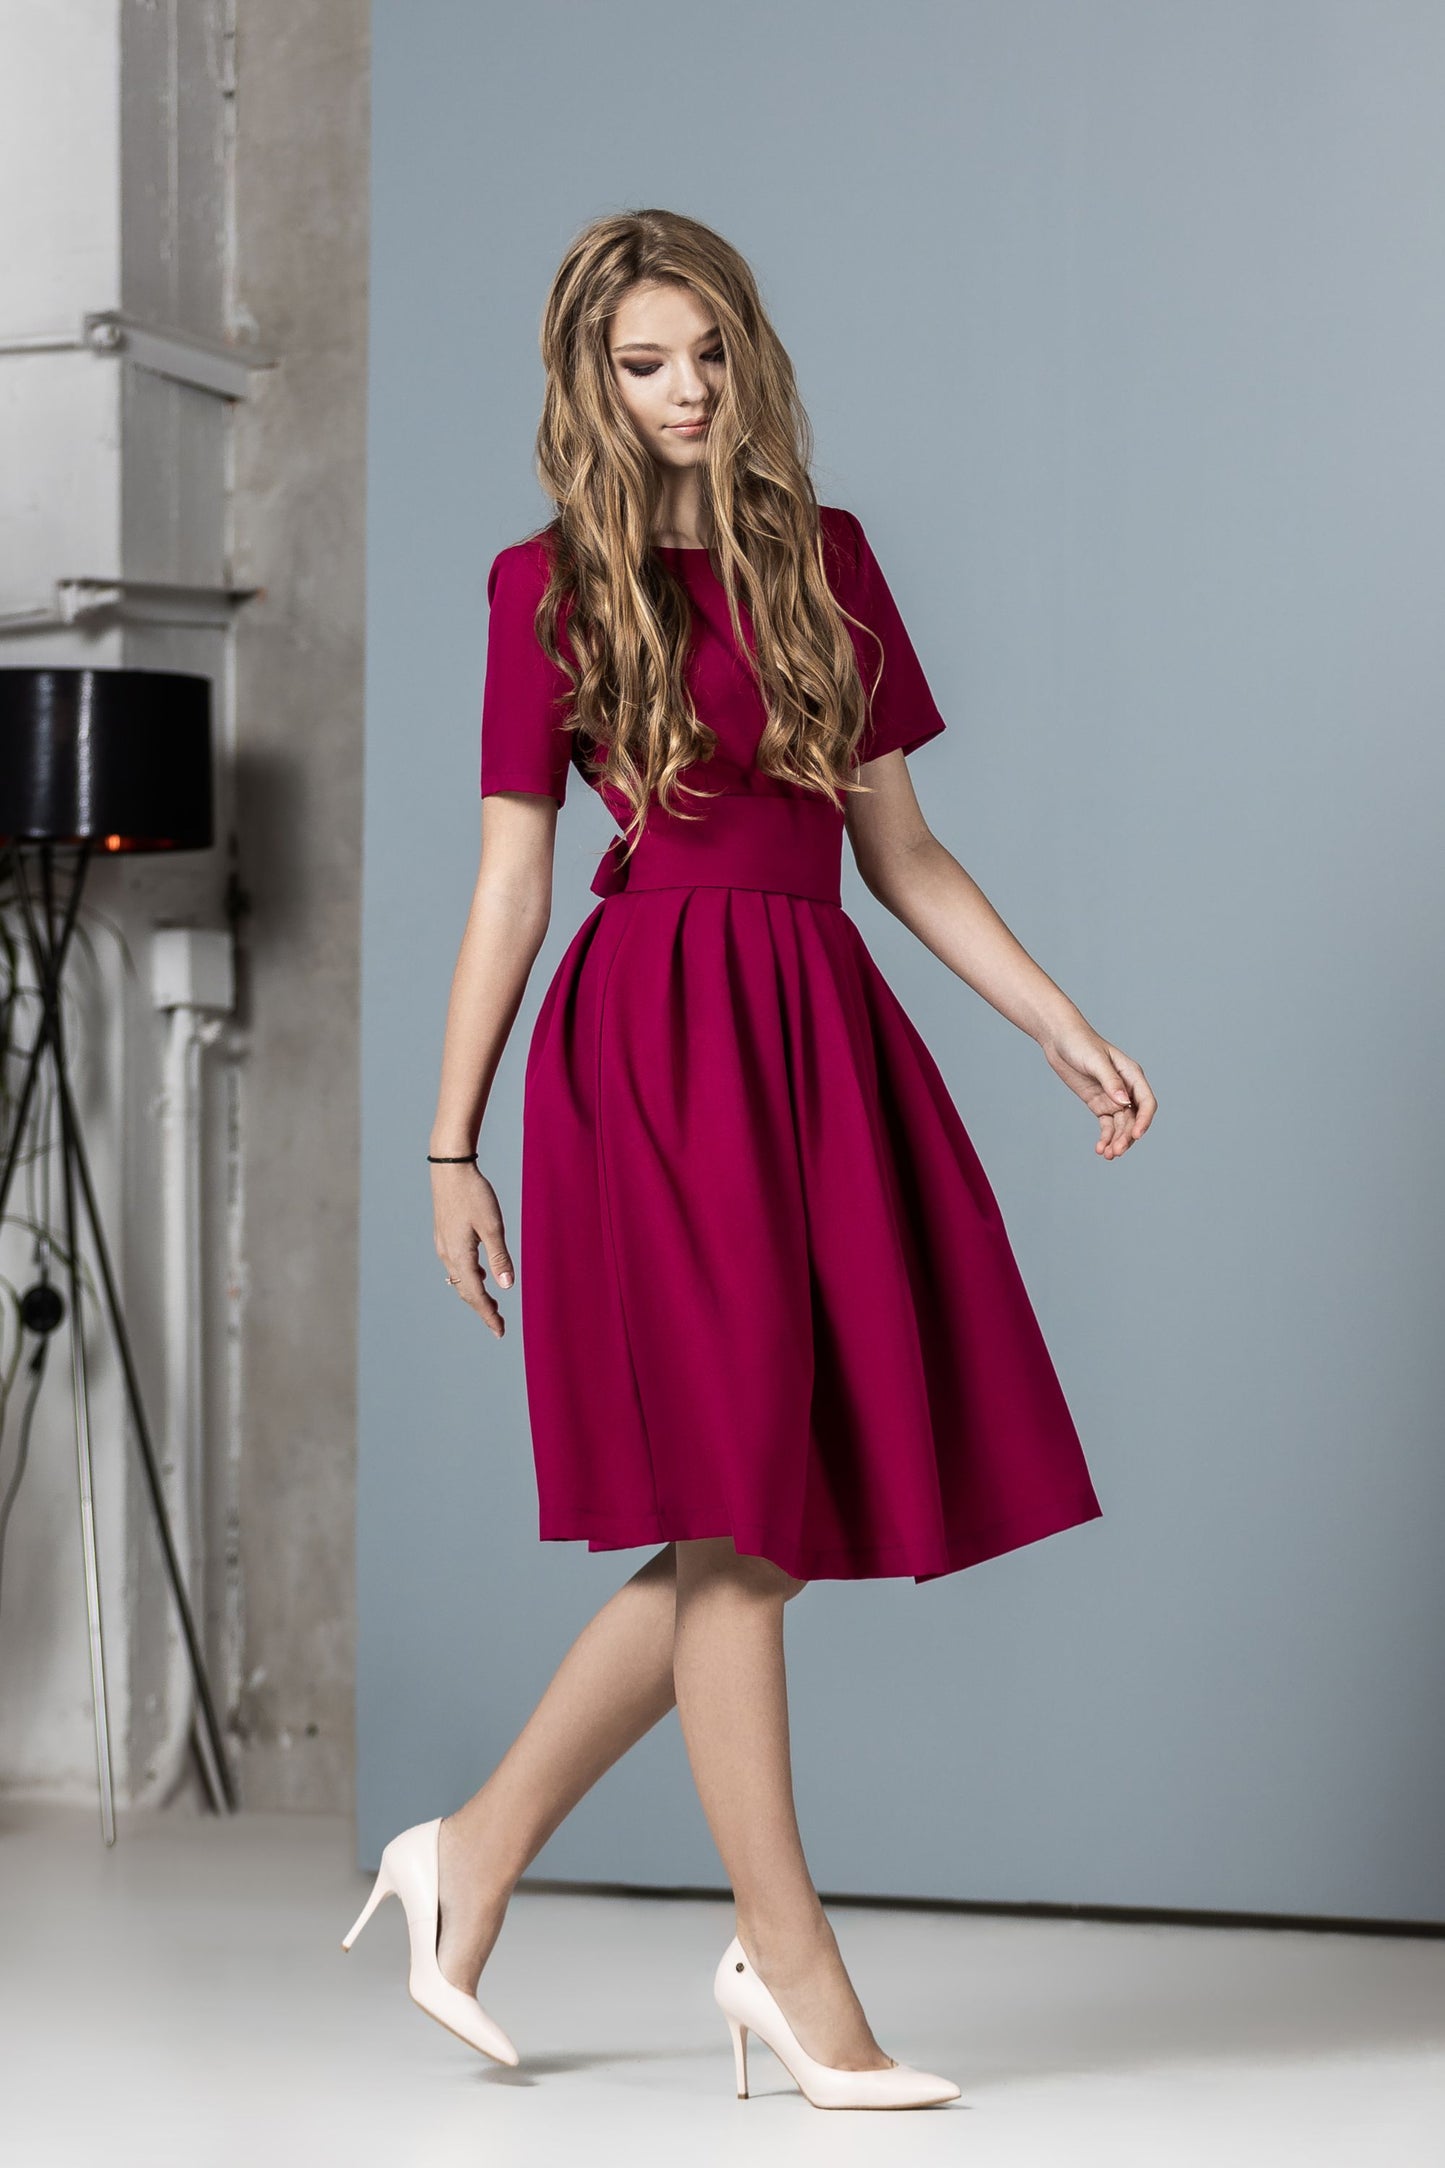 Raspberry red color dress with pleats